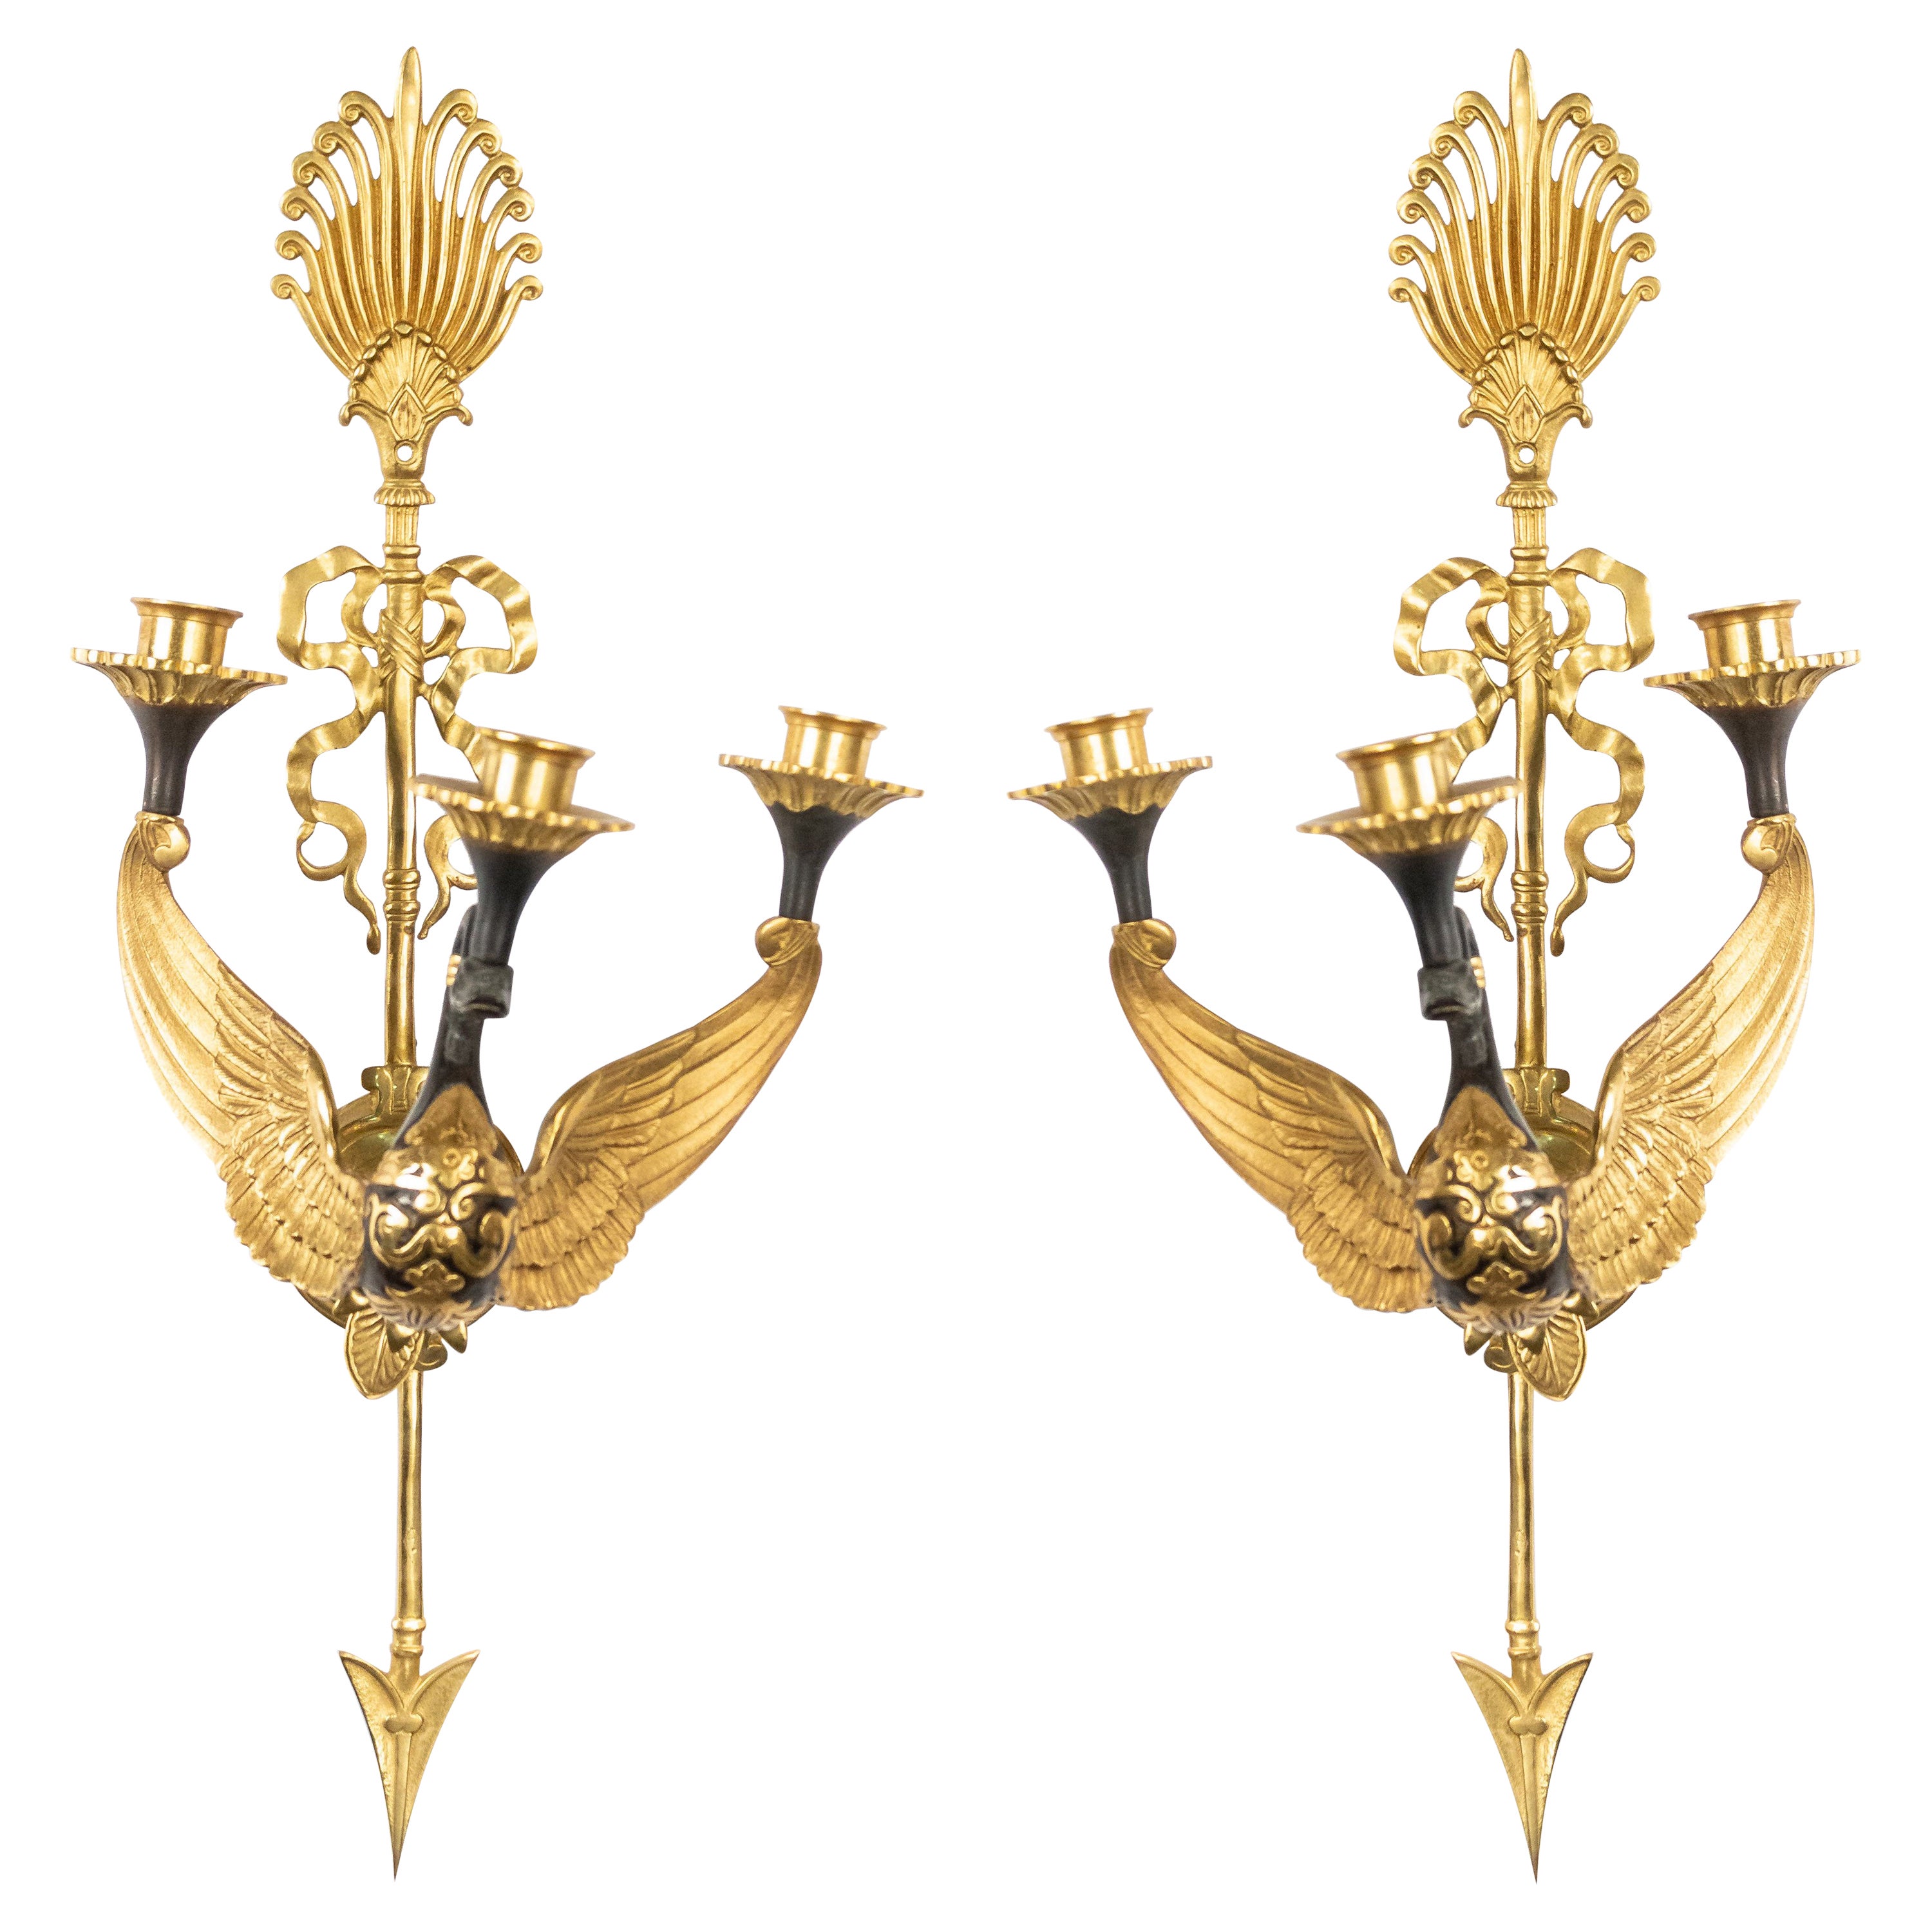 Four Russian Neoclassic Style Ormolu and Bronze Swan Wall Sconces